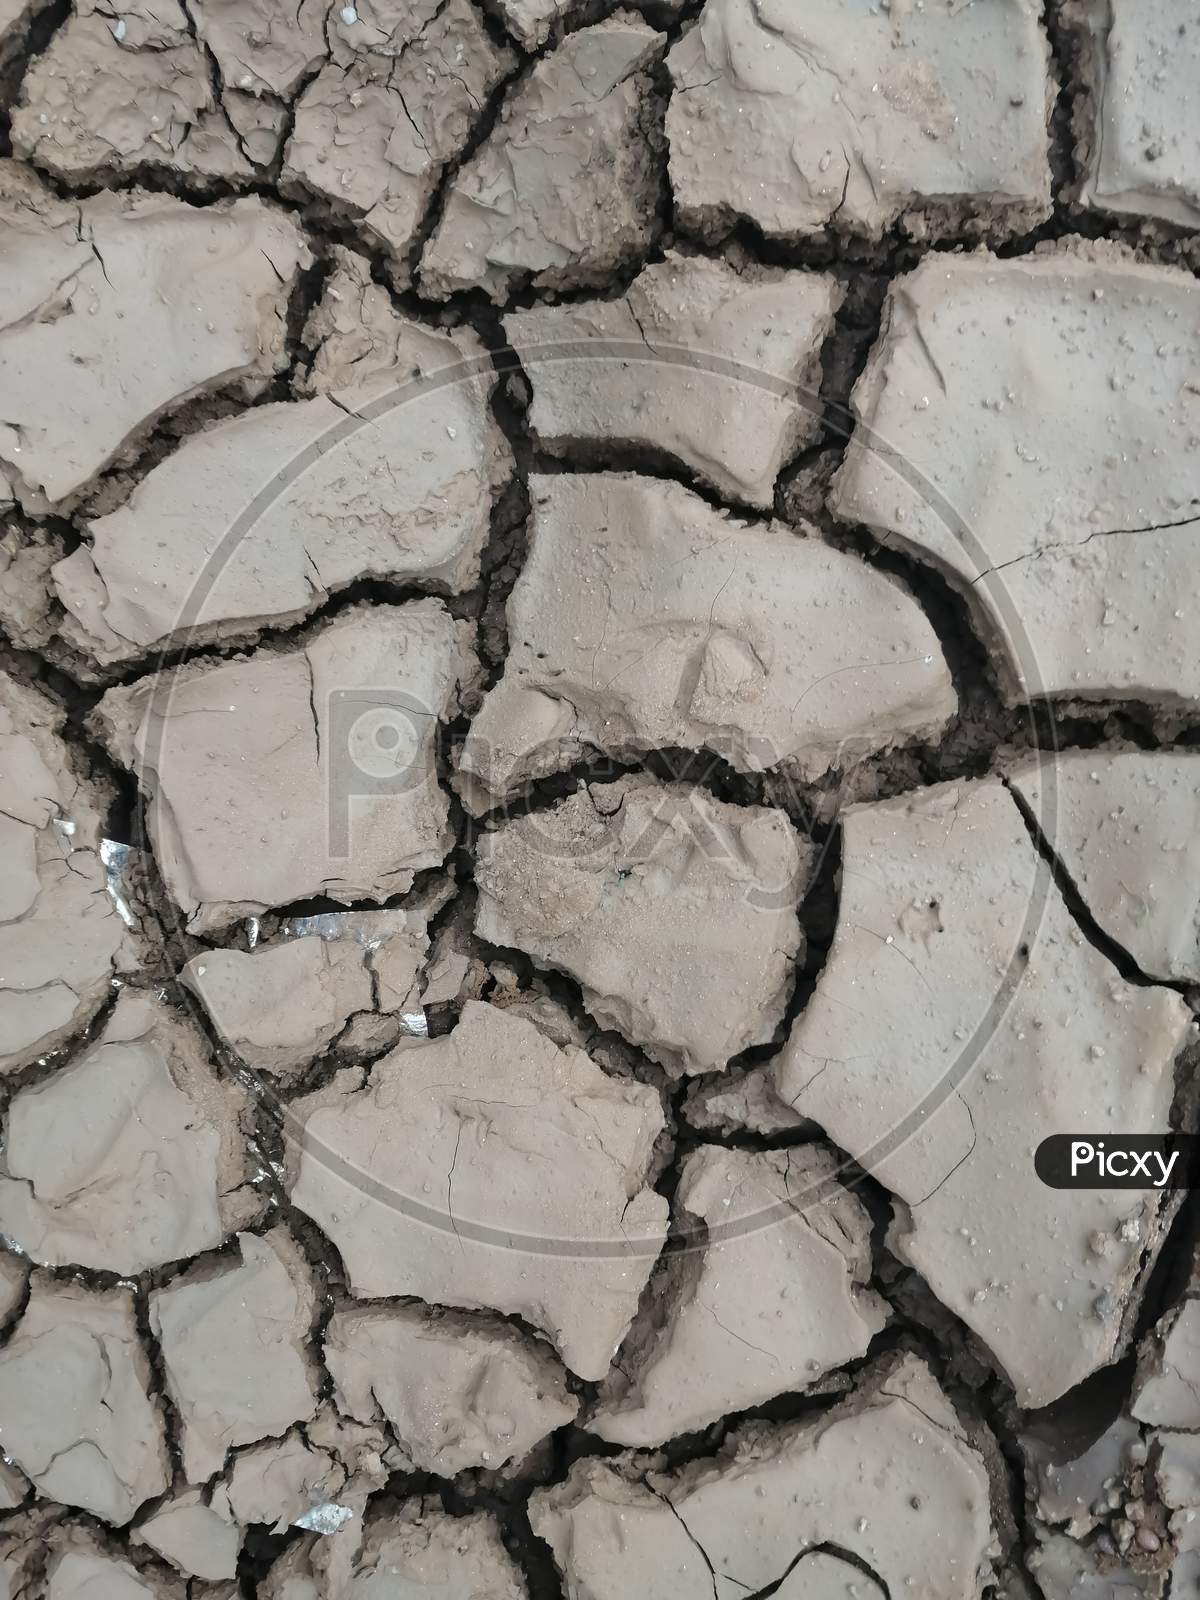 dry land - earth cracks in  agricultural land